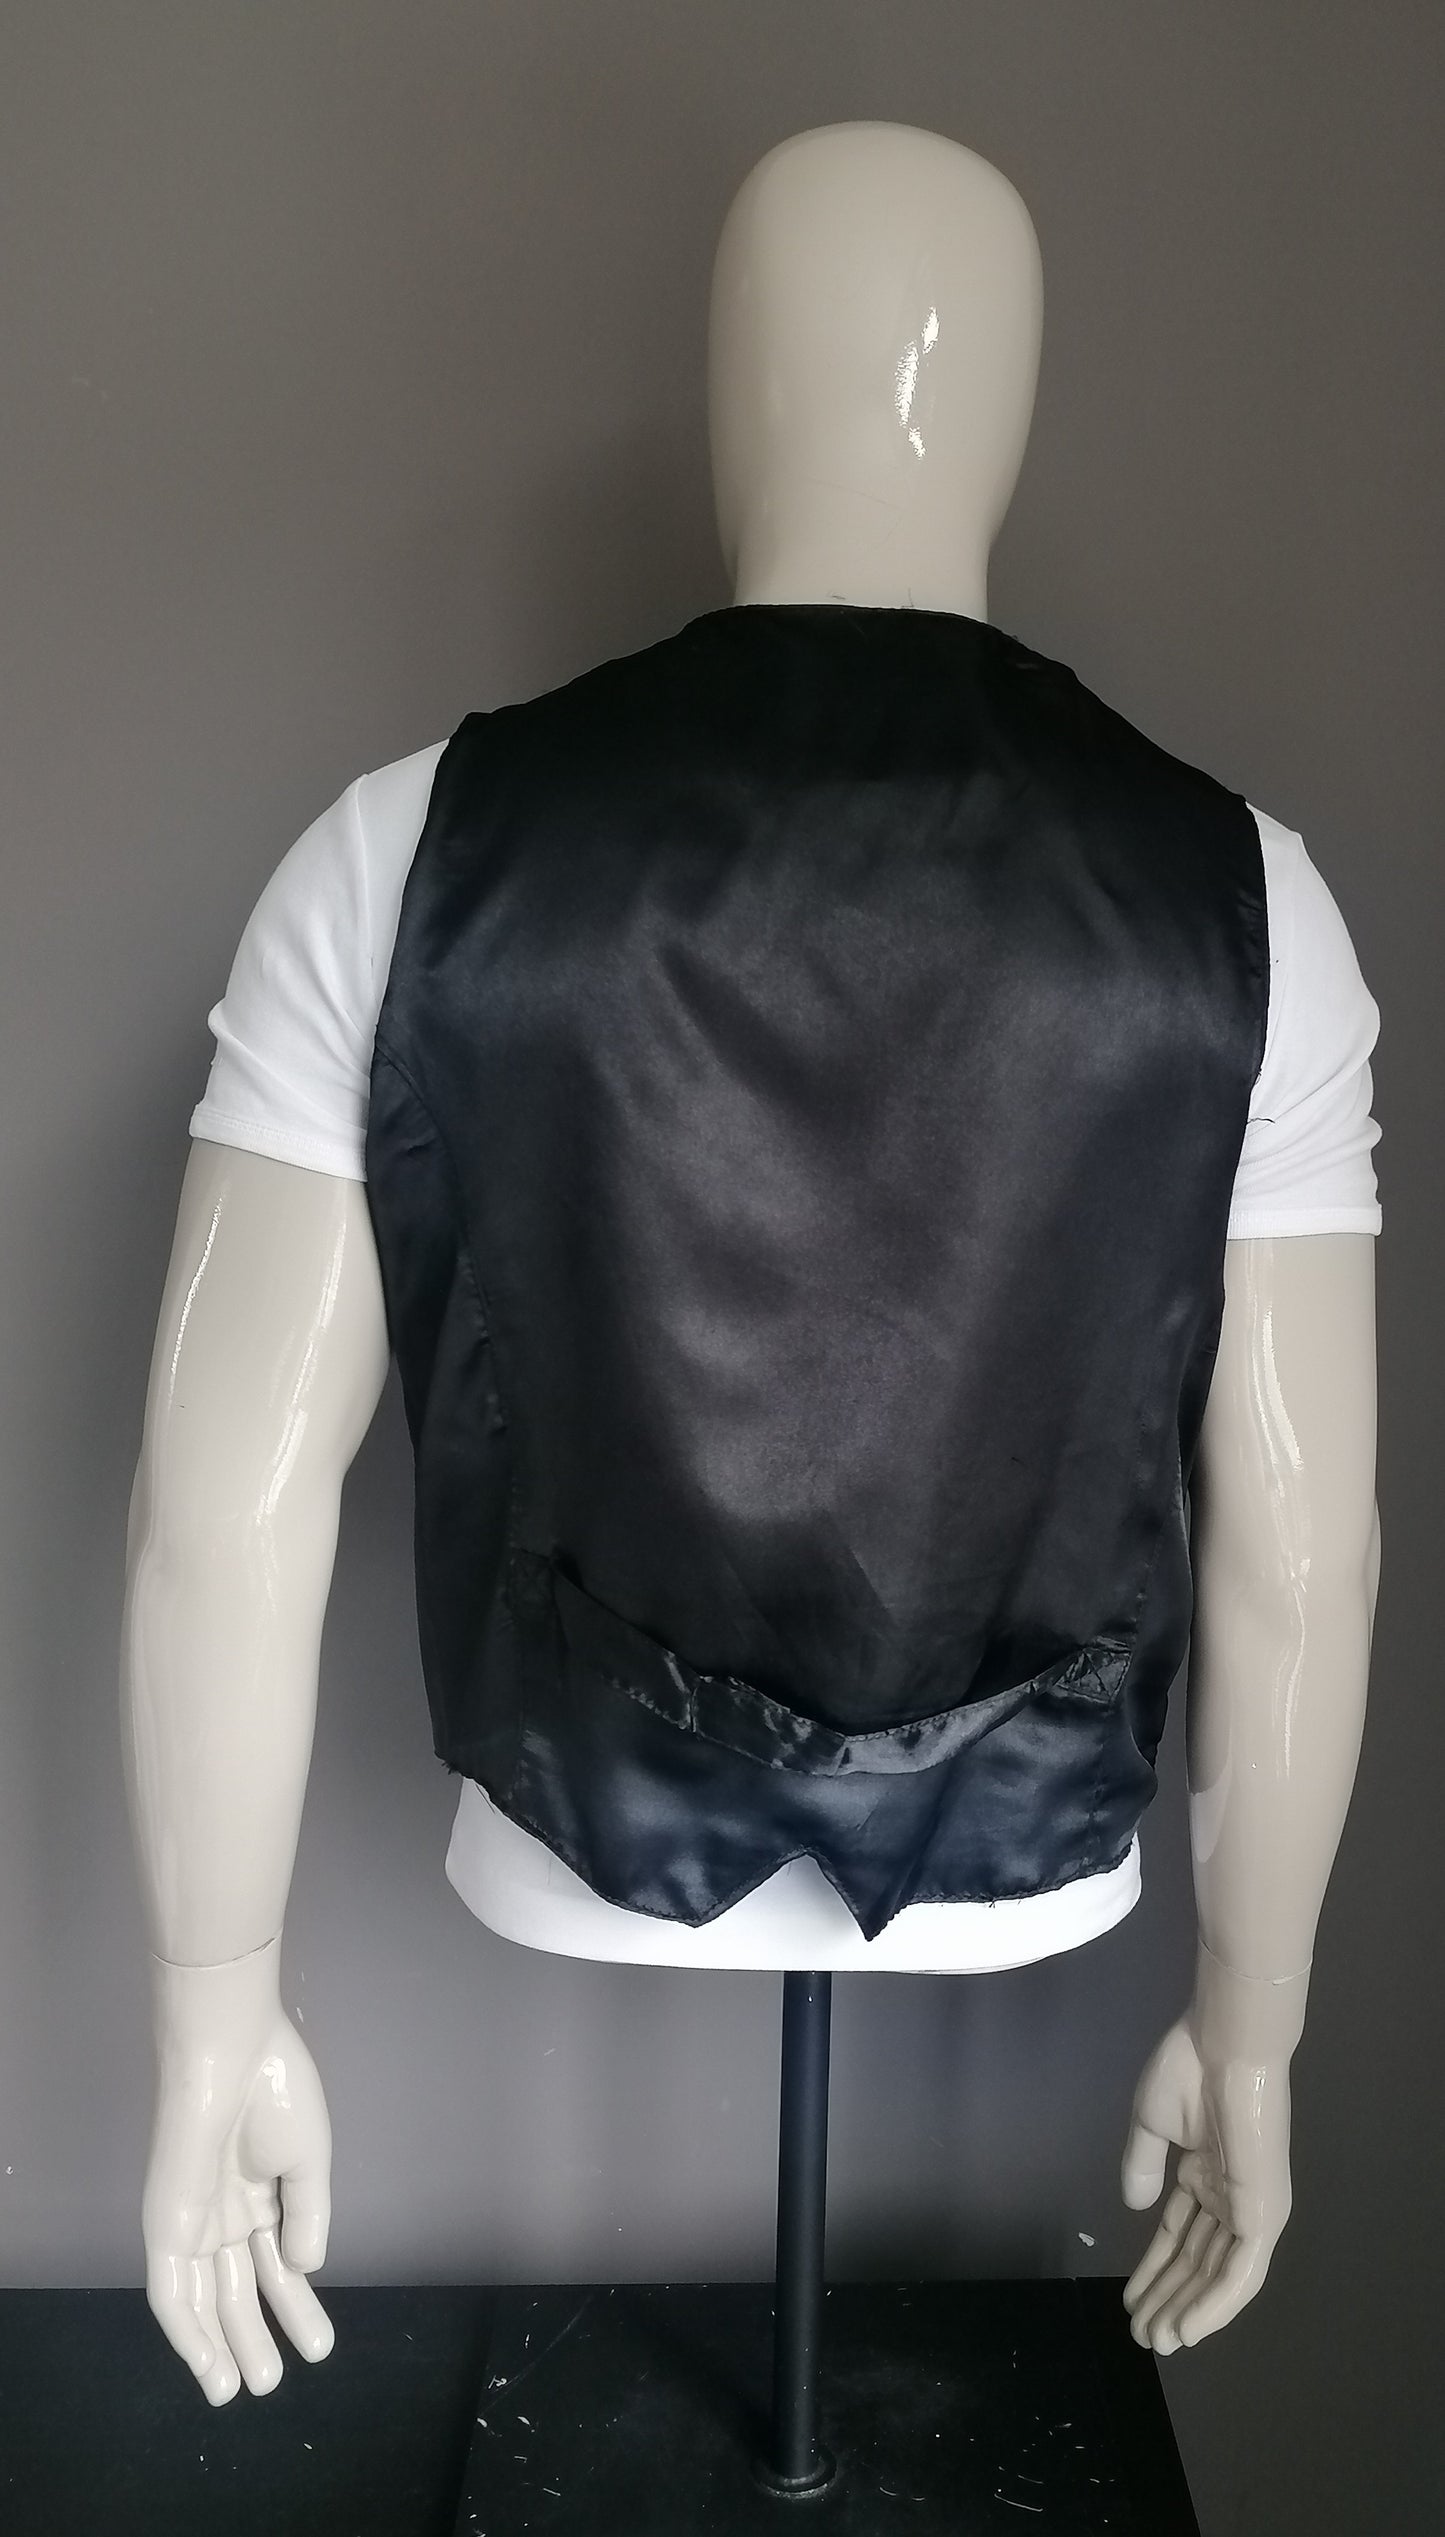 In-Frac-Tigs leather waistcoat with press studs. Black colored. Size L.